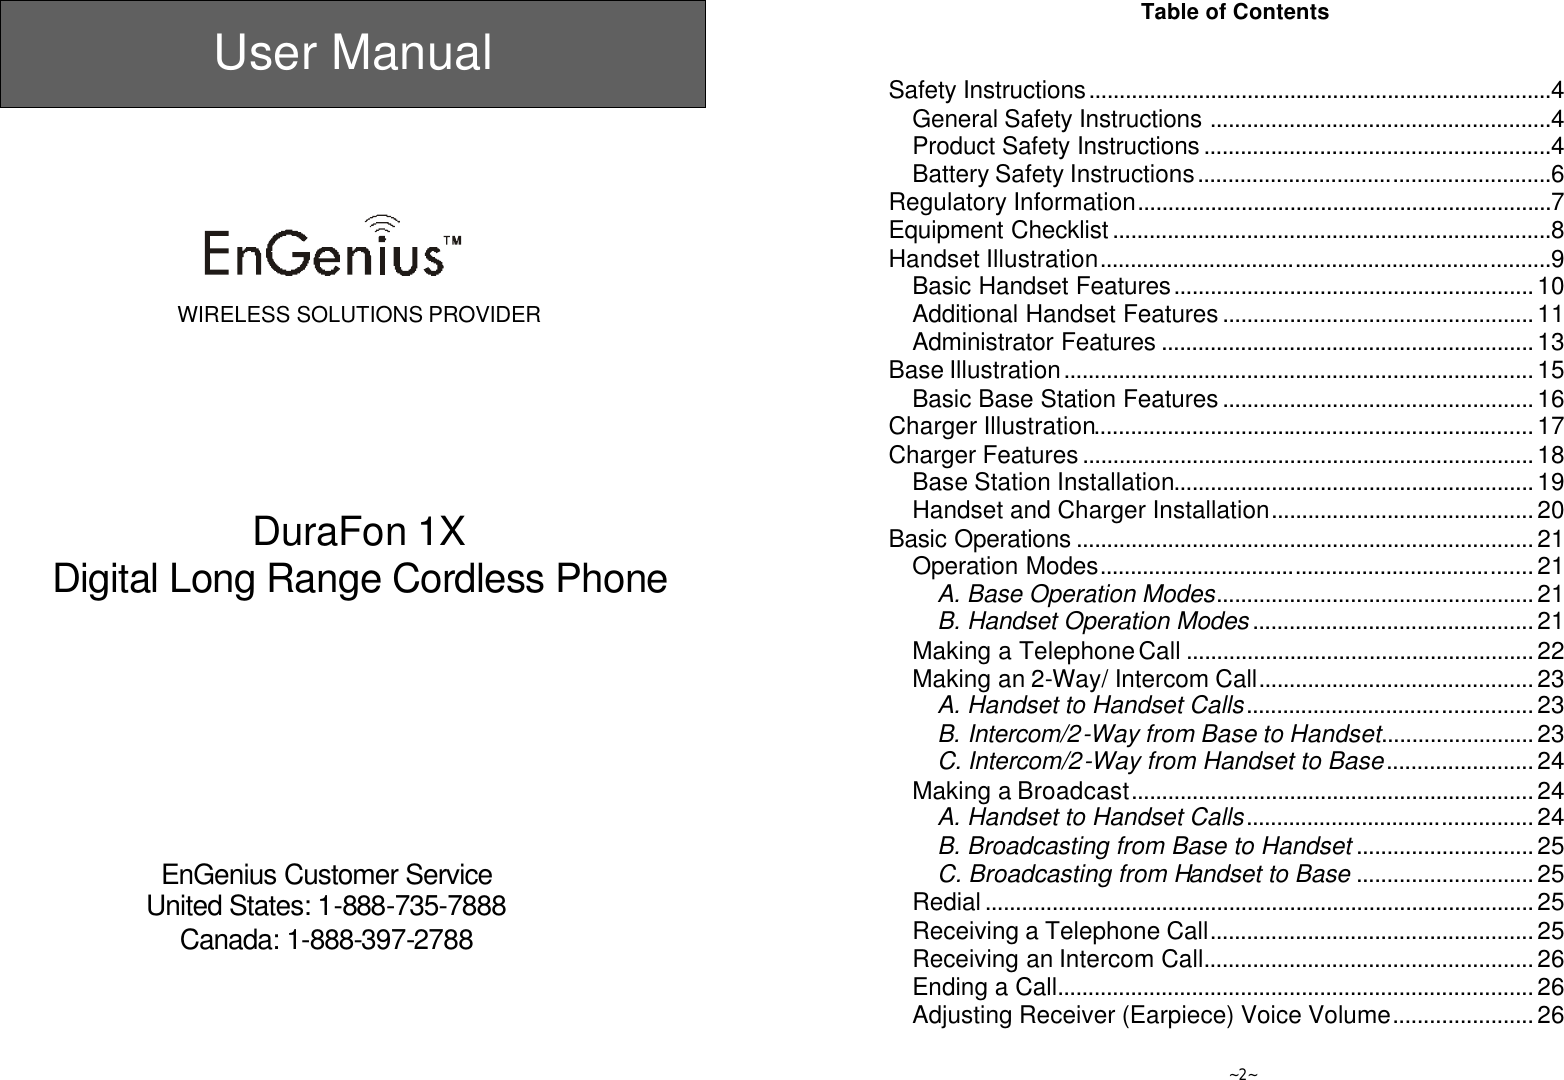  User Manual       WIRELESS SOLUTIONS PROVIDER        DuraFon 1X Digital Long Range Cordless Phone           EnGenius Customer Service United States: 1-888-735-7888 Canada: 1-888-397-2788   ~2~ Table of Contents   Safety Instructions............................................................................4 General Safety Instructions ........................................................4 Product Safety Instructions.........................................................4 Battery Safety Instructions..........................................................6 Regulatory Information....................................................................7 Equipment Checklist........................................................................8 Handset Illustration..........................................................................9 Basic Handset Features...........................................................10 Additional Handset Features...................................................11 Administrator Features .............................................................13 Base Illustration.............................................................................15 Basic Base Station Features...................................................16 Charger Illustration........................................................................17 Charger Features..........................................................................18 Base Station Installation...........................................................19 Handset and Charger Installation...........................................20 Basic Operations ...........................................................................21 Operation Modes.......................................................................21 A. Base Operation Modes....................................................21 B. Handset Operation Modes..............................................21 Making a Telephone Call .........................................................22 Making an 2-Way/ Intercom Call.............................................23 A. Handset to Handset Calls...............................................23 B. Intercom/2-Way from Base to Handset.........................23 C. Intercom/2-Way from Handset to Base........................24 Making a Broadcast..................................................................24 A. Handset to Handset Calls...............................................24 B. Broadcasting from Base to Handset .............................25 C. Broadcasting from Handset to Base .............................25 Redial..........................................................................................25 Receiving a Telephone Call.....................................................25 Receiving an Intercom Call......................................................26 Ending a Call..............................................................................26 Adjusting Receiver (Earpiece) Voice Volume.......................26 